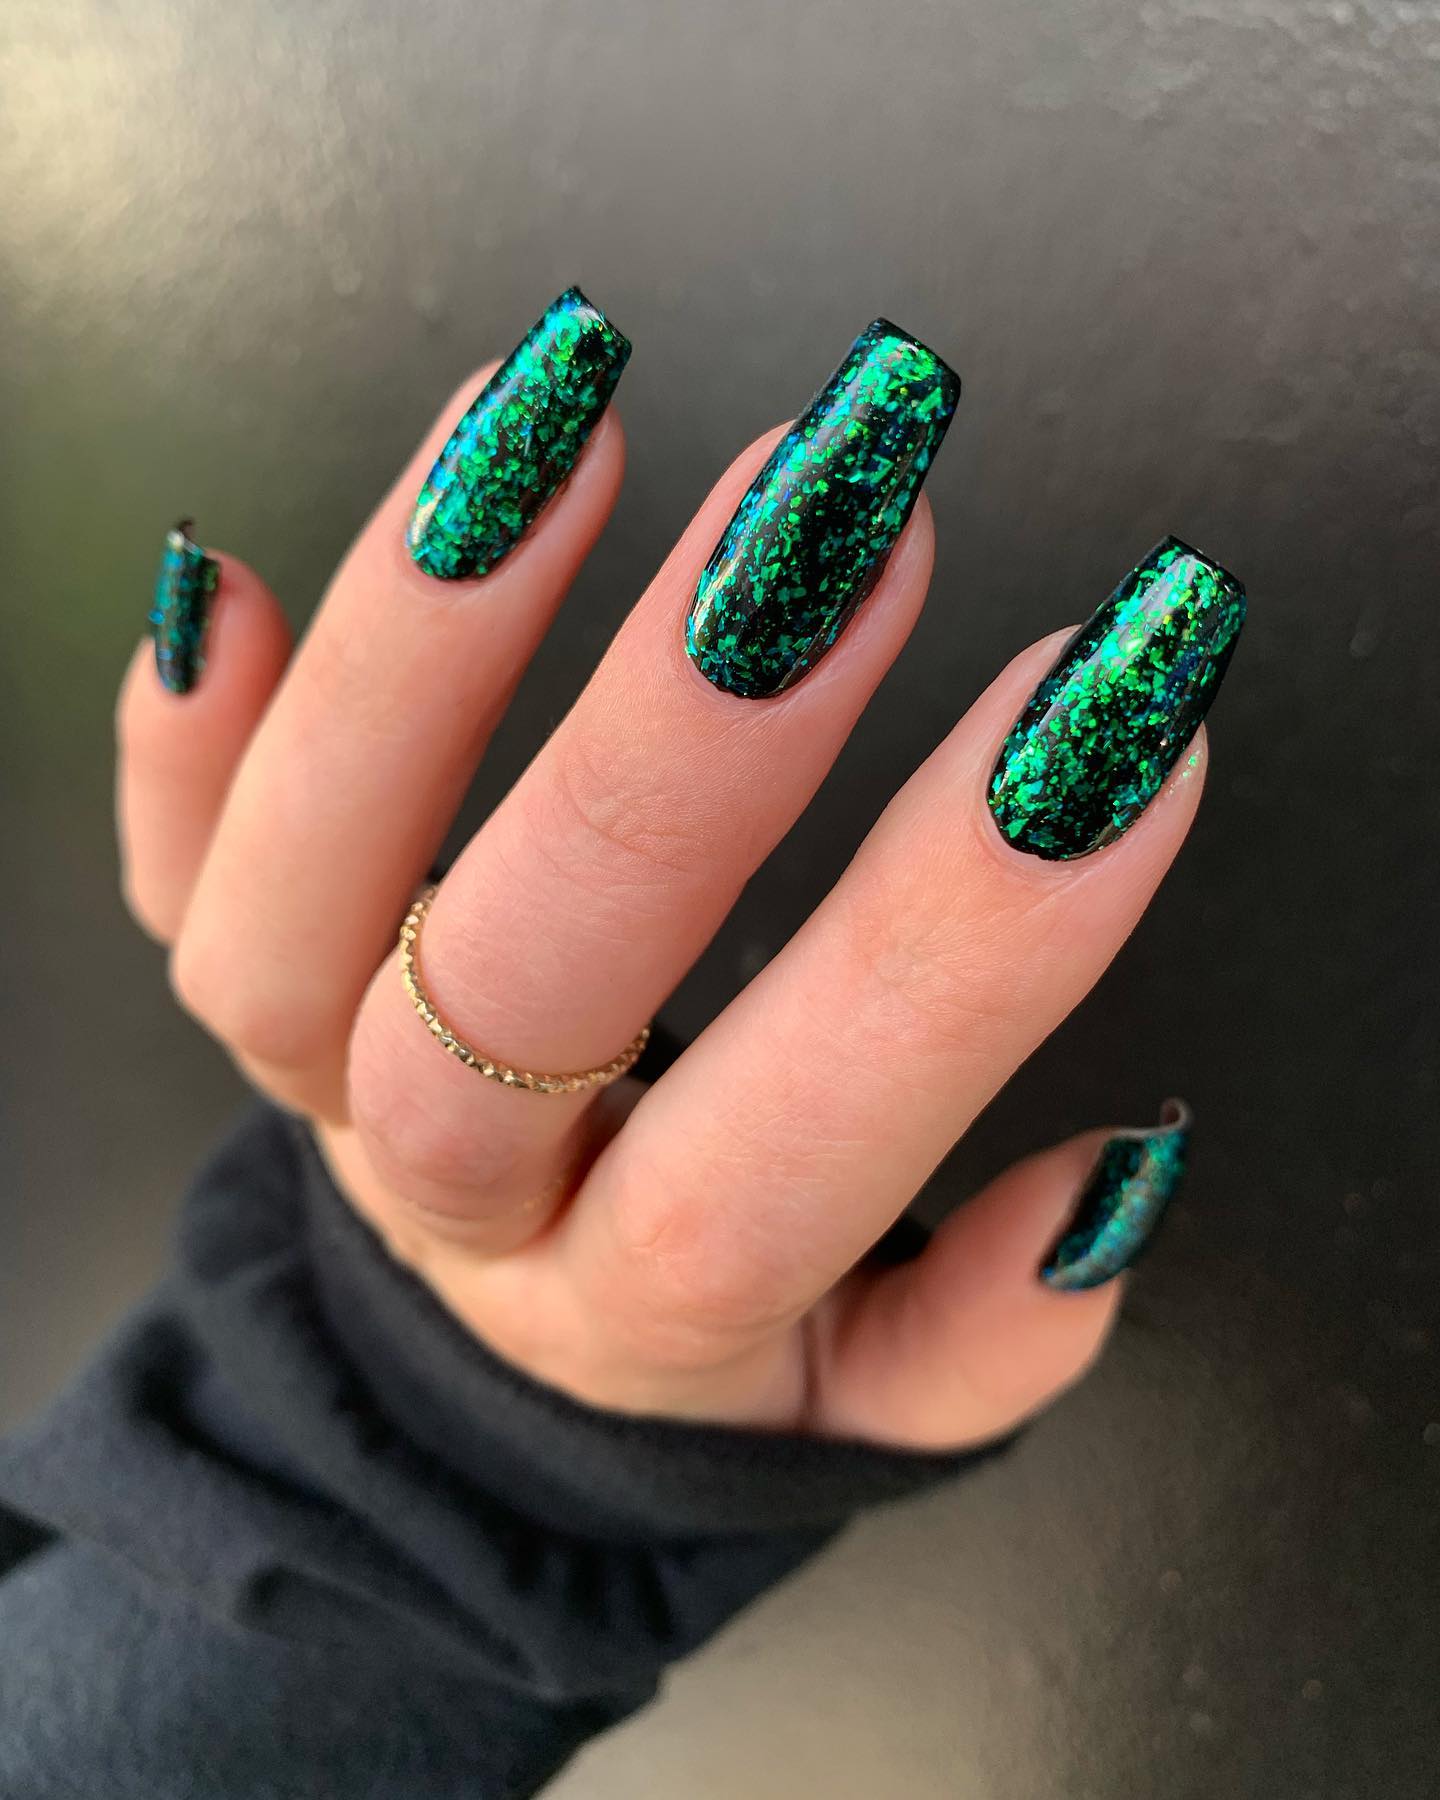 Long Square Black Nails with Bright Green Sparkles